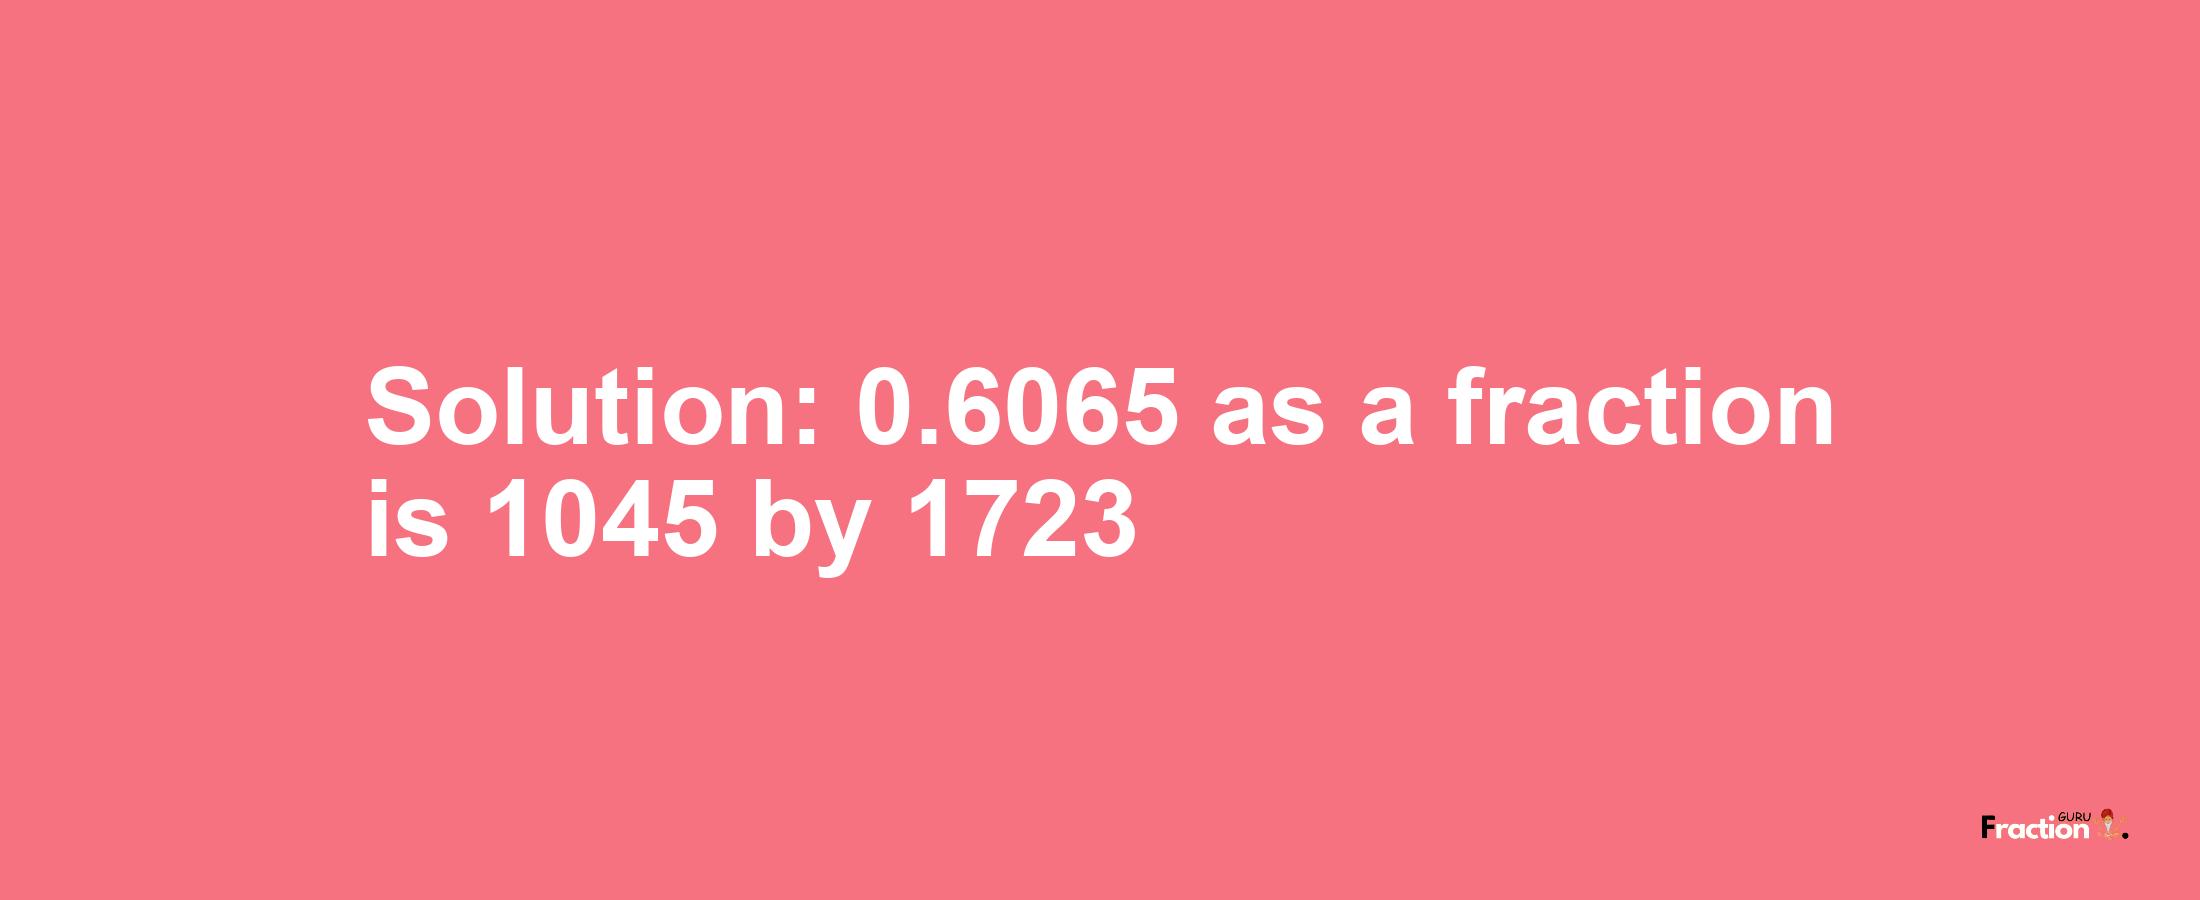 Solution:0.6065 as a fraction is 1045/1723